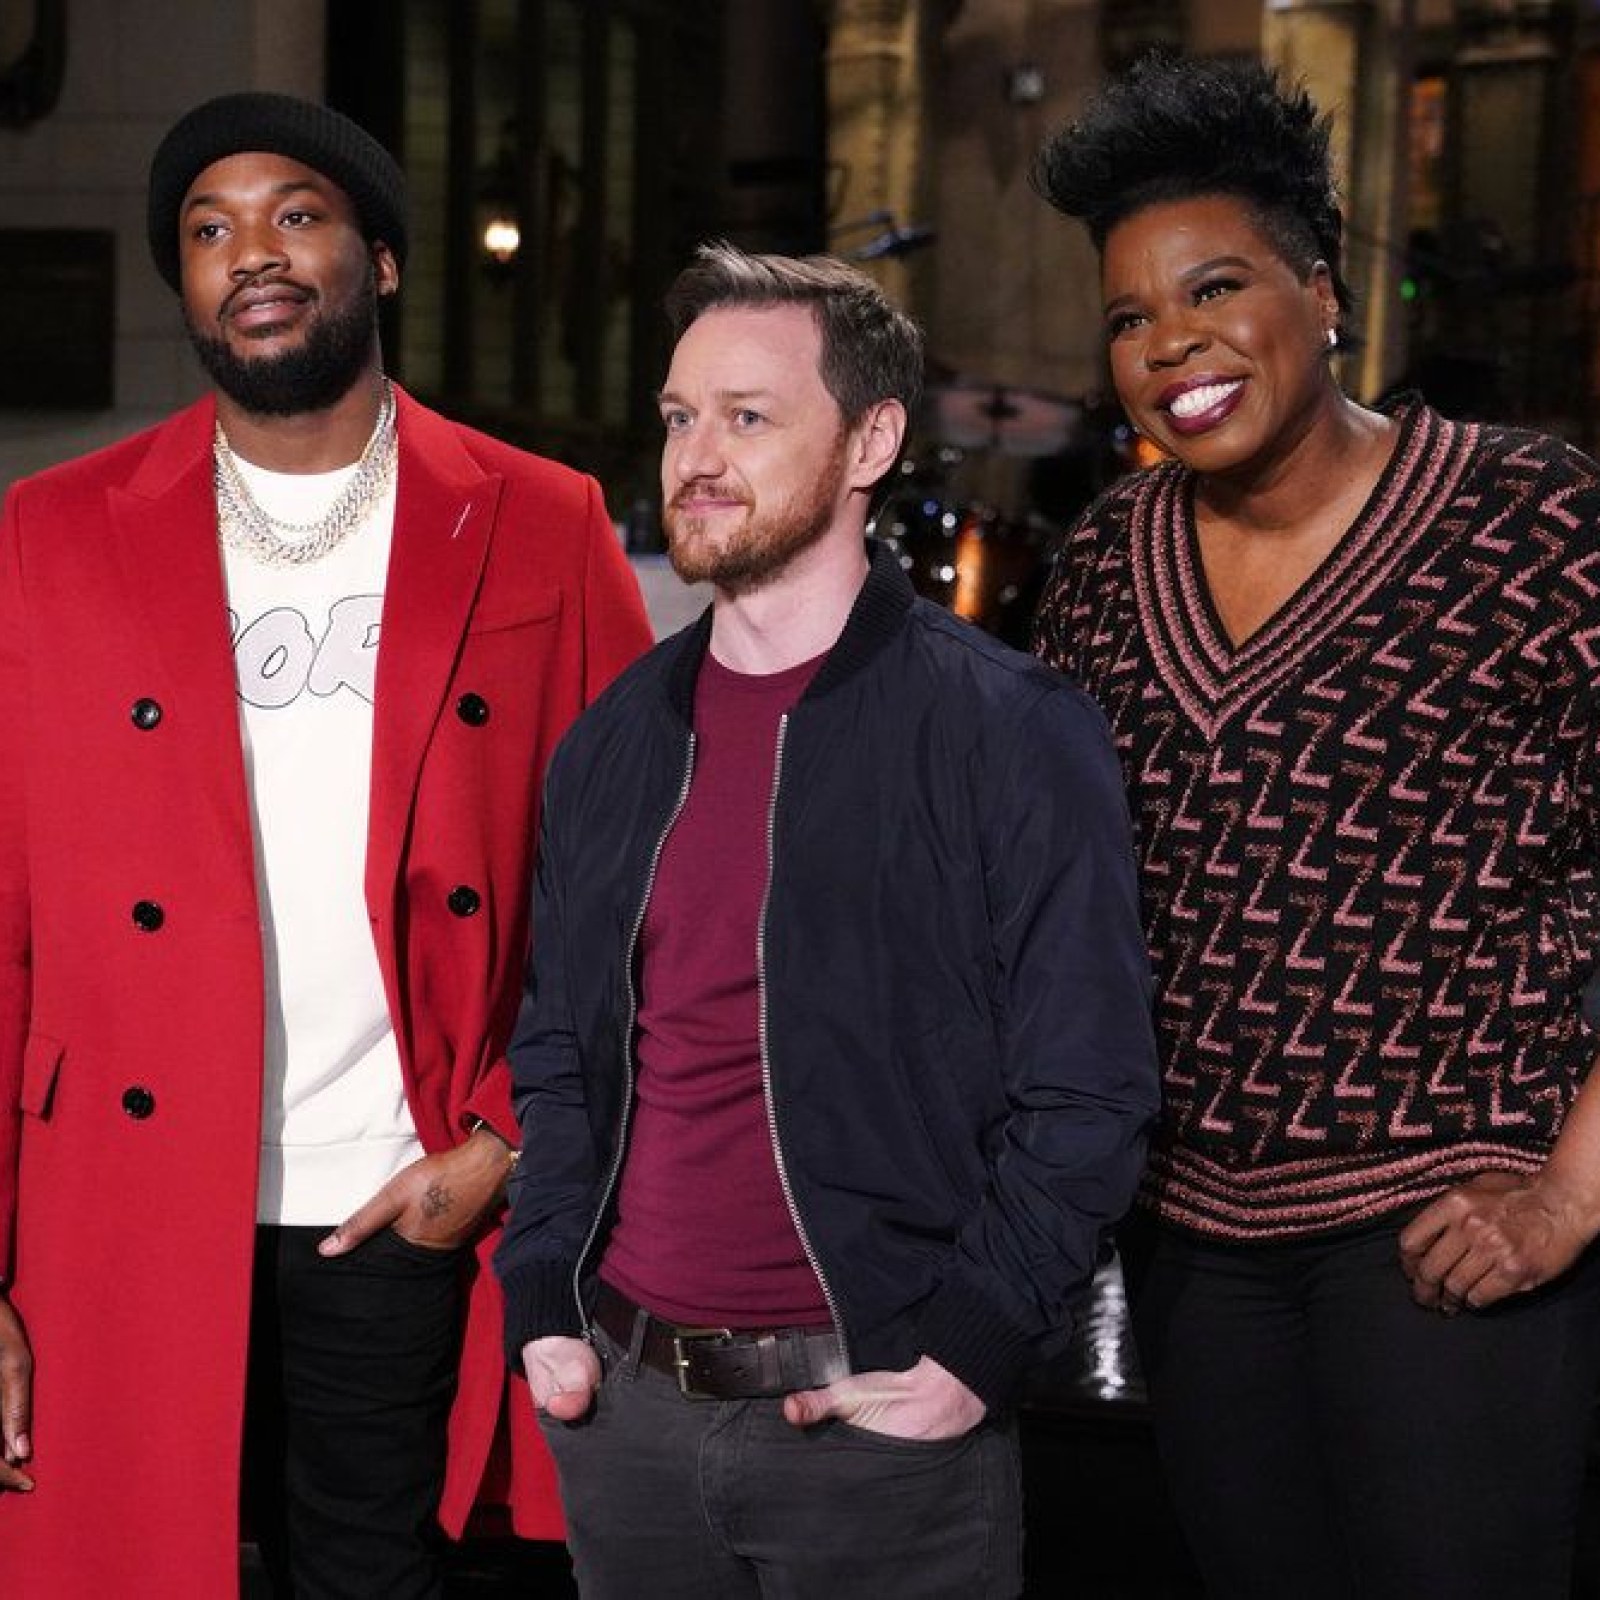 Watch The 6 Best 'SNL' Skits From Last Night